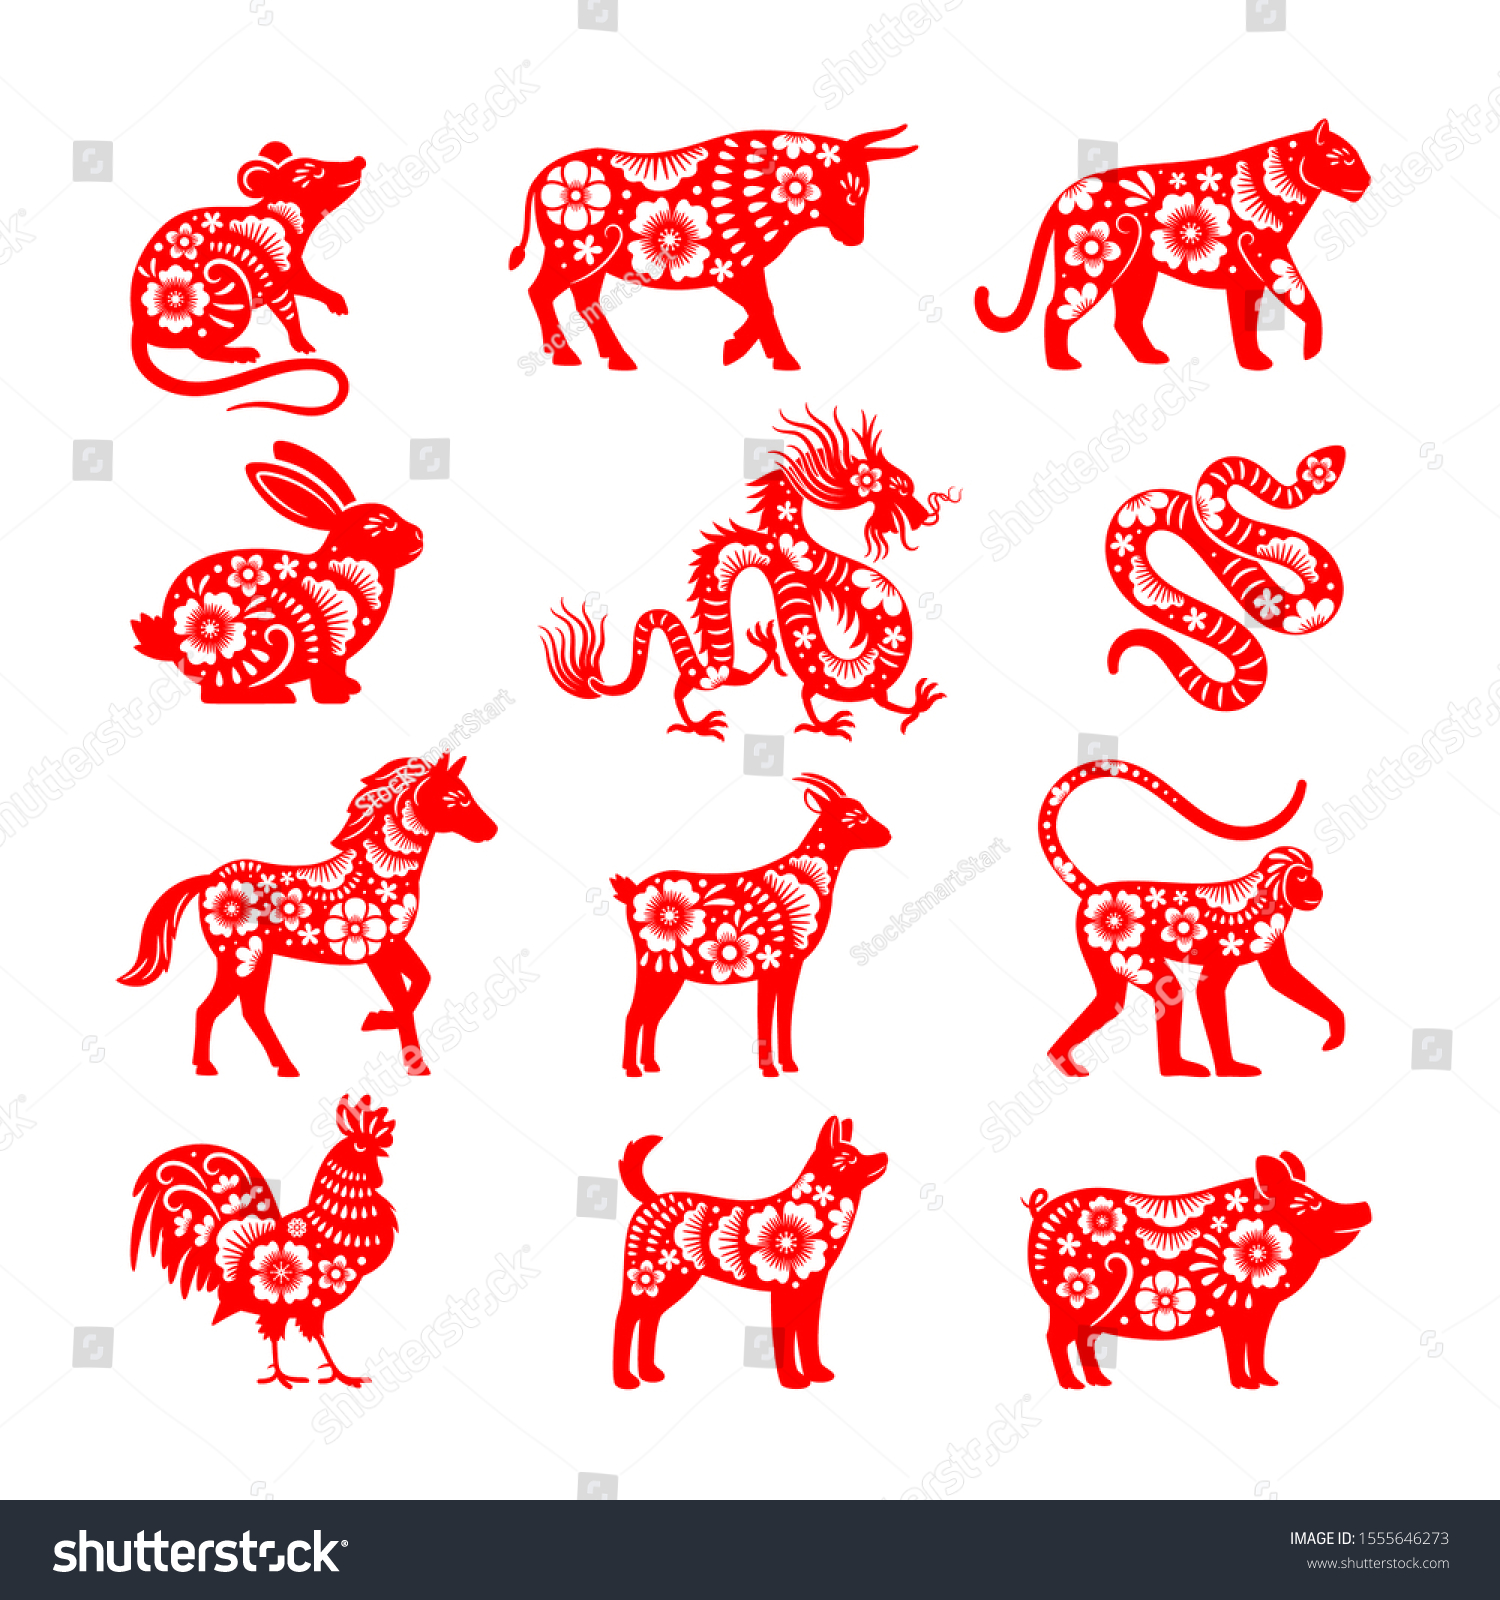 SVG of Traditional chinese zodiac illustrations. Vector china horoscope animal symbols, bull and mouse, pig and dragon vectors for papercut svg